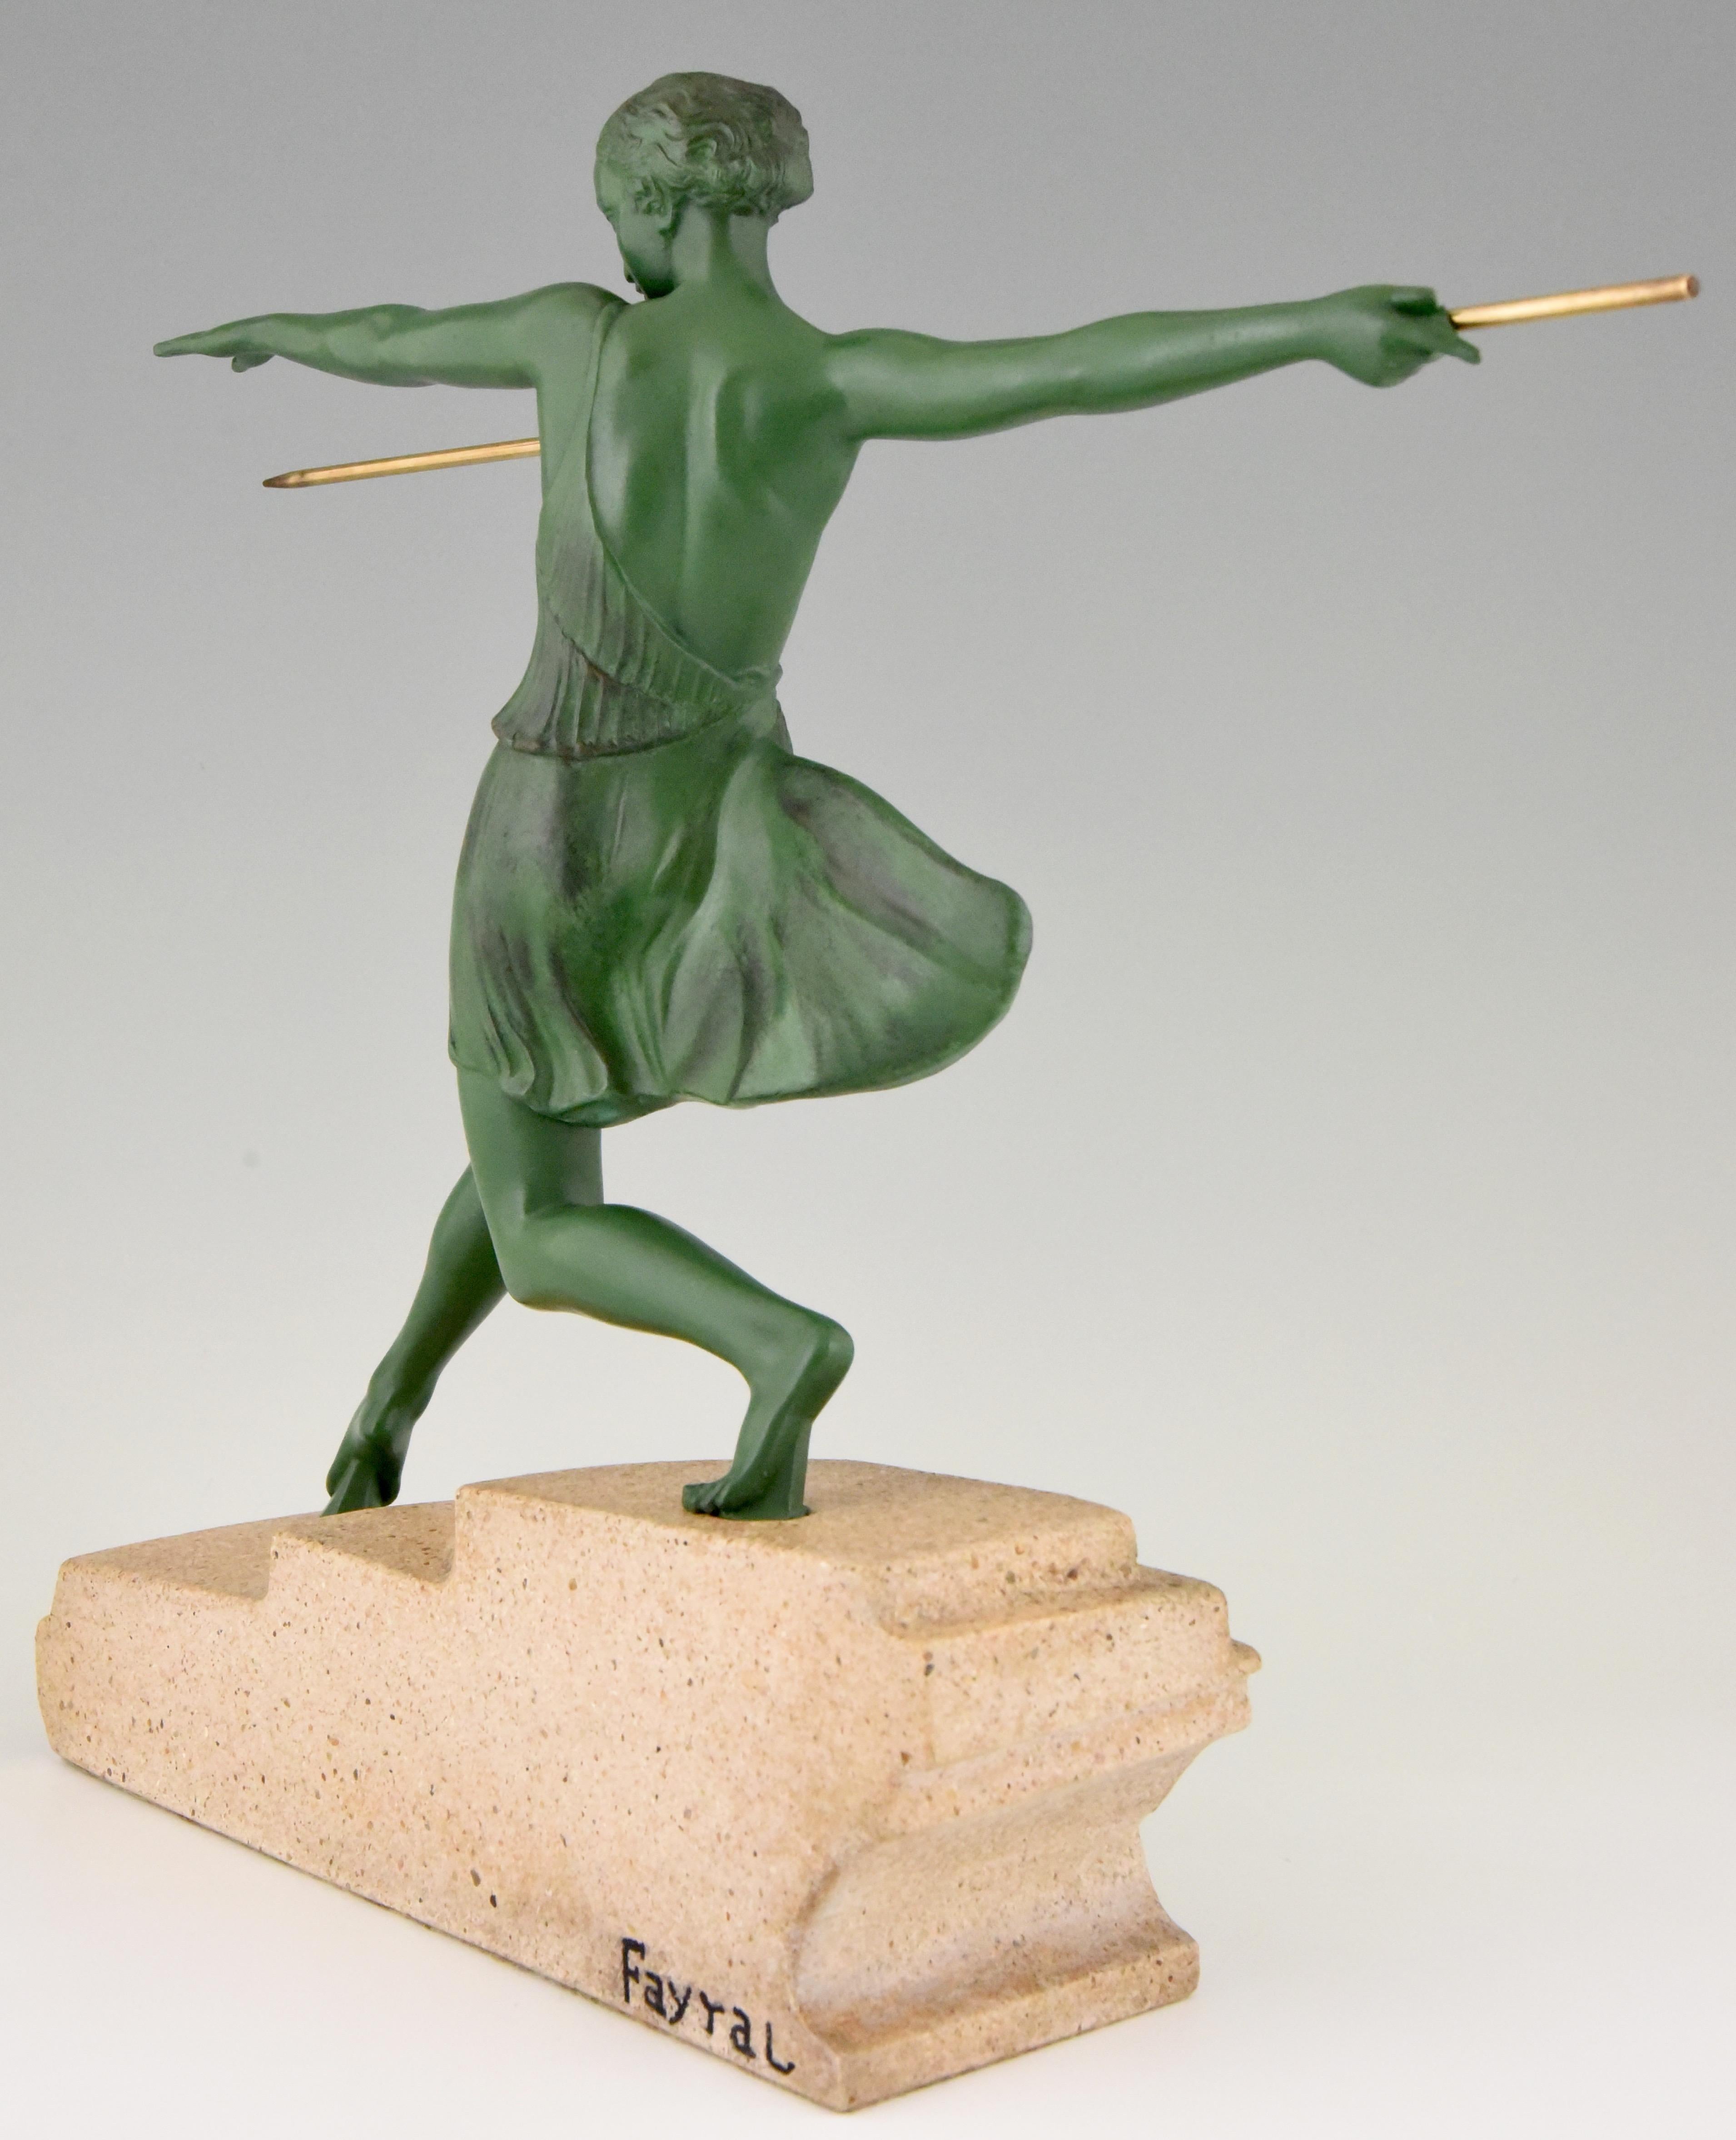 Art Deco Sculpture Female Javelin Thrower Fayral, Pierre Le Faguays 1